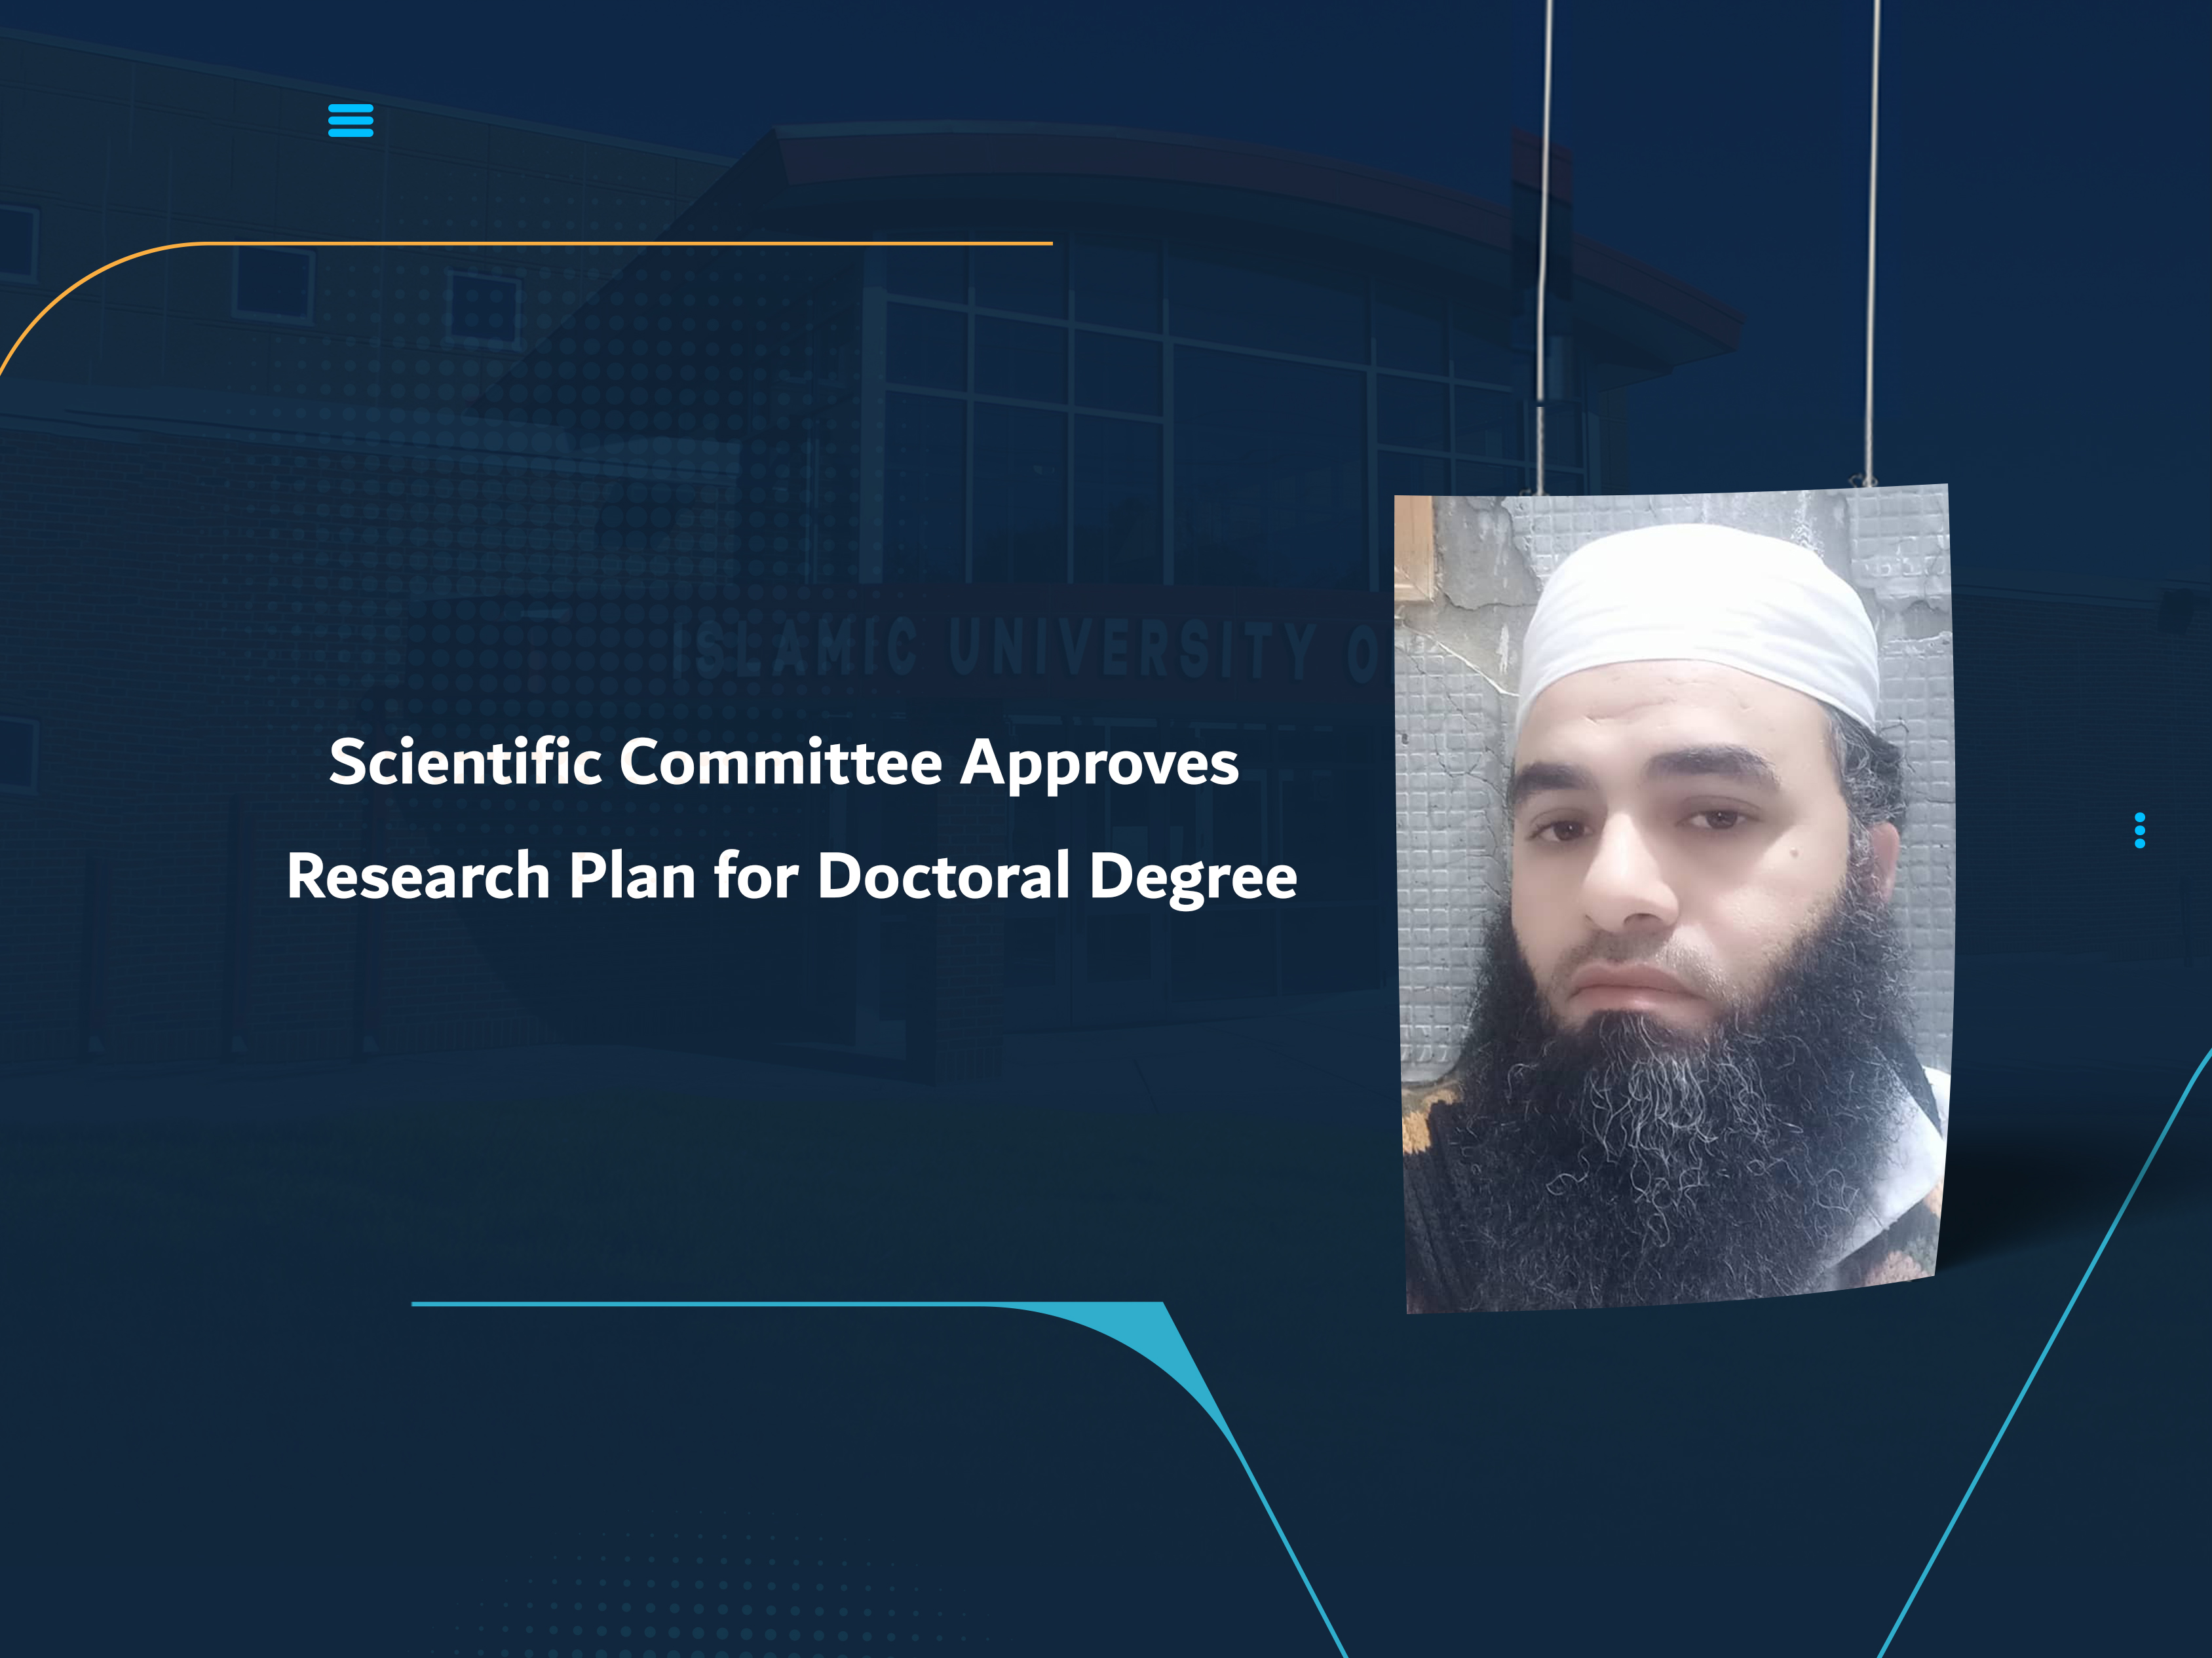 Scientific Committee Approves Research Plan for Doctoral Degree